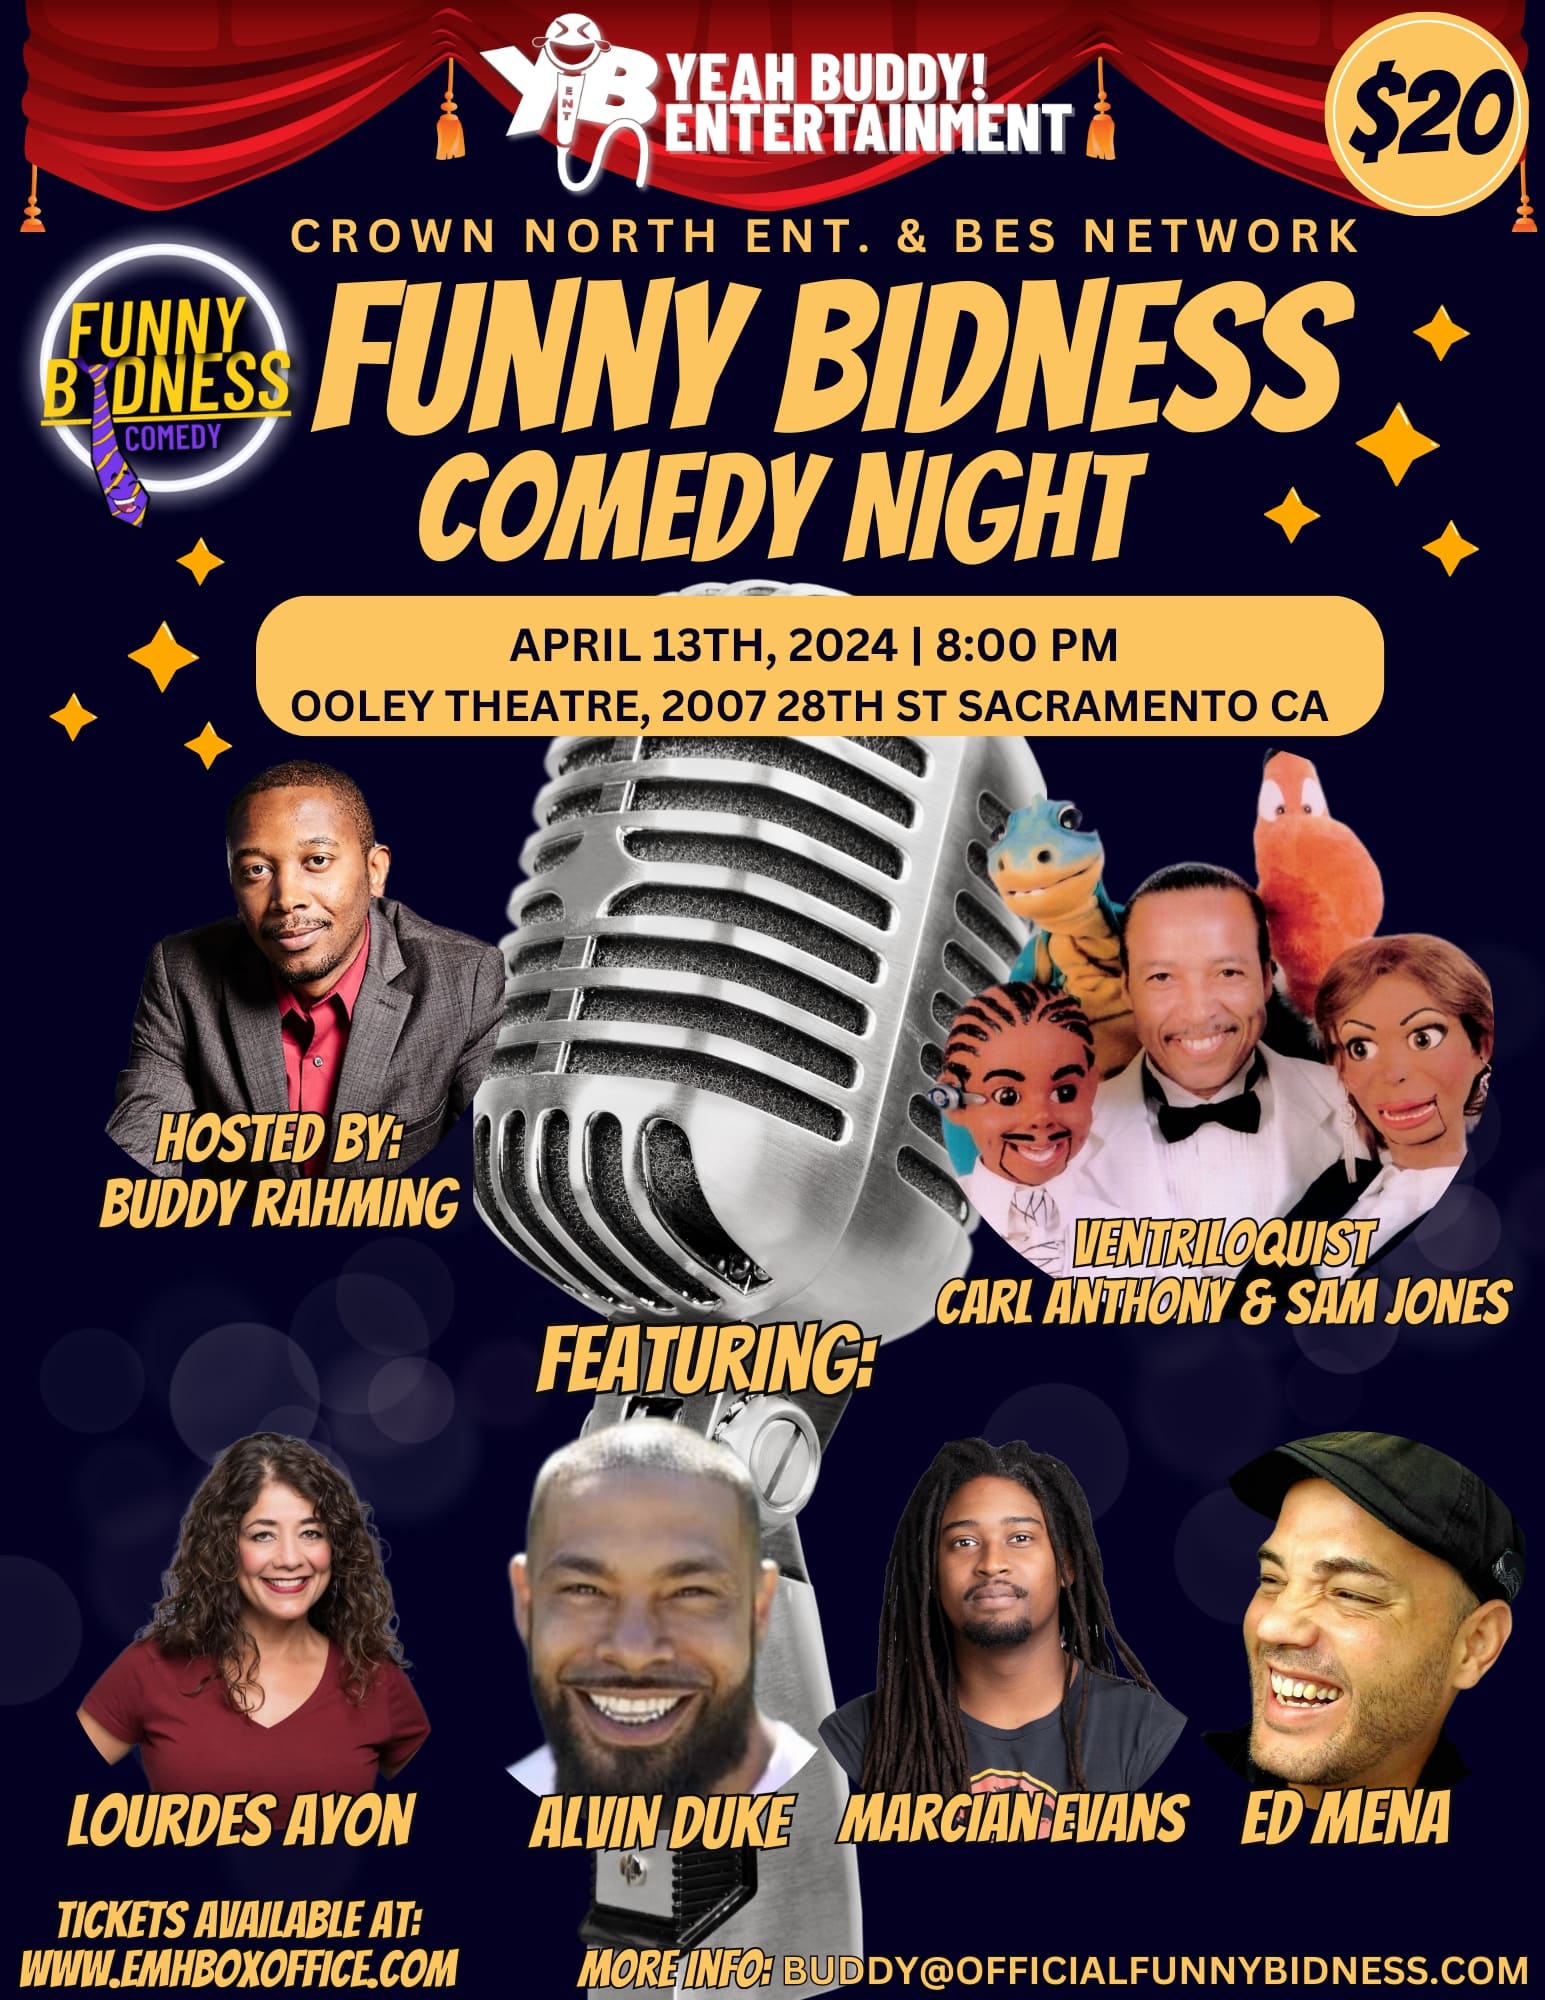 Funny Bidness Comedy Night At The Ooley Theater – April 13th